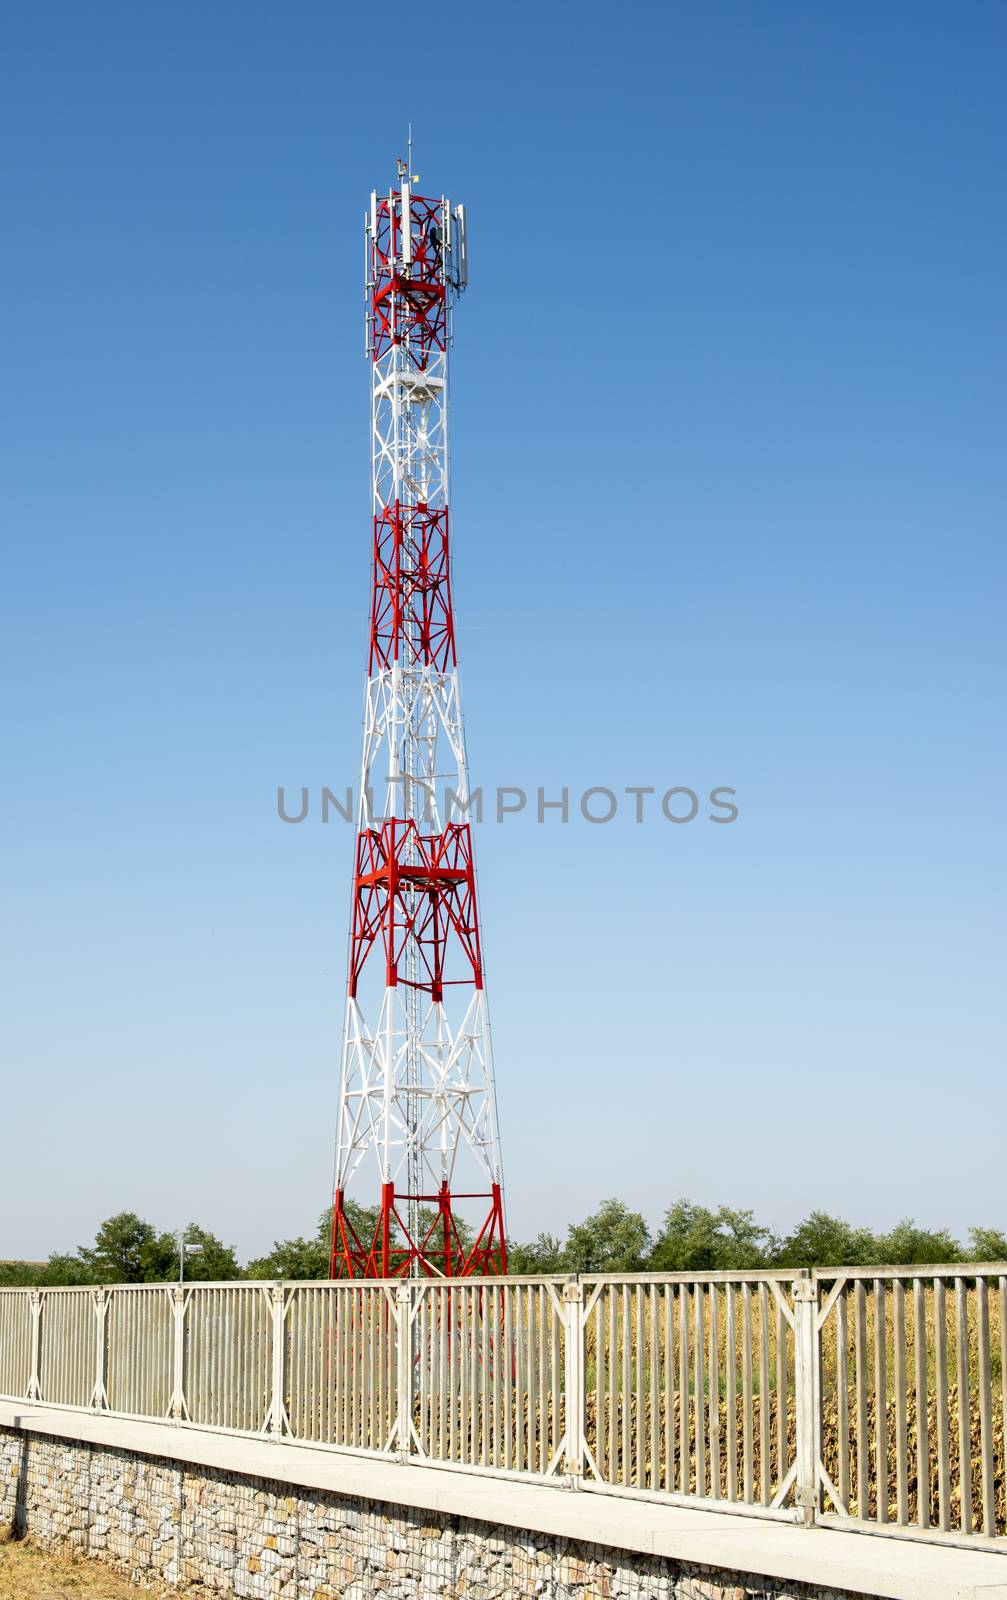 5G antenna for high speed internet distribution. 5G repeaters outside the city. Bright colours red and white.